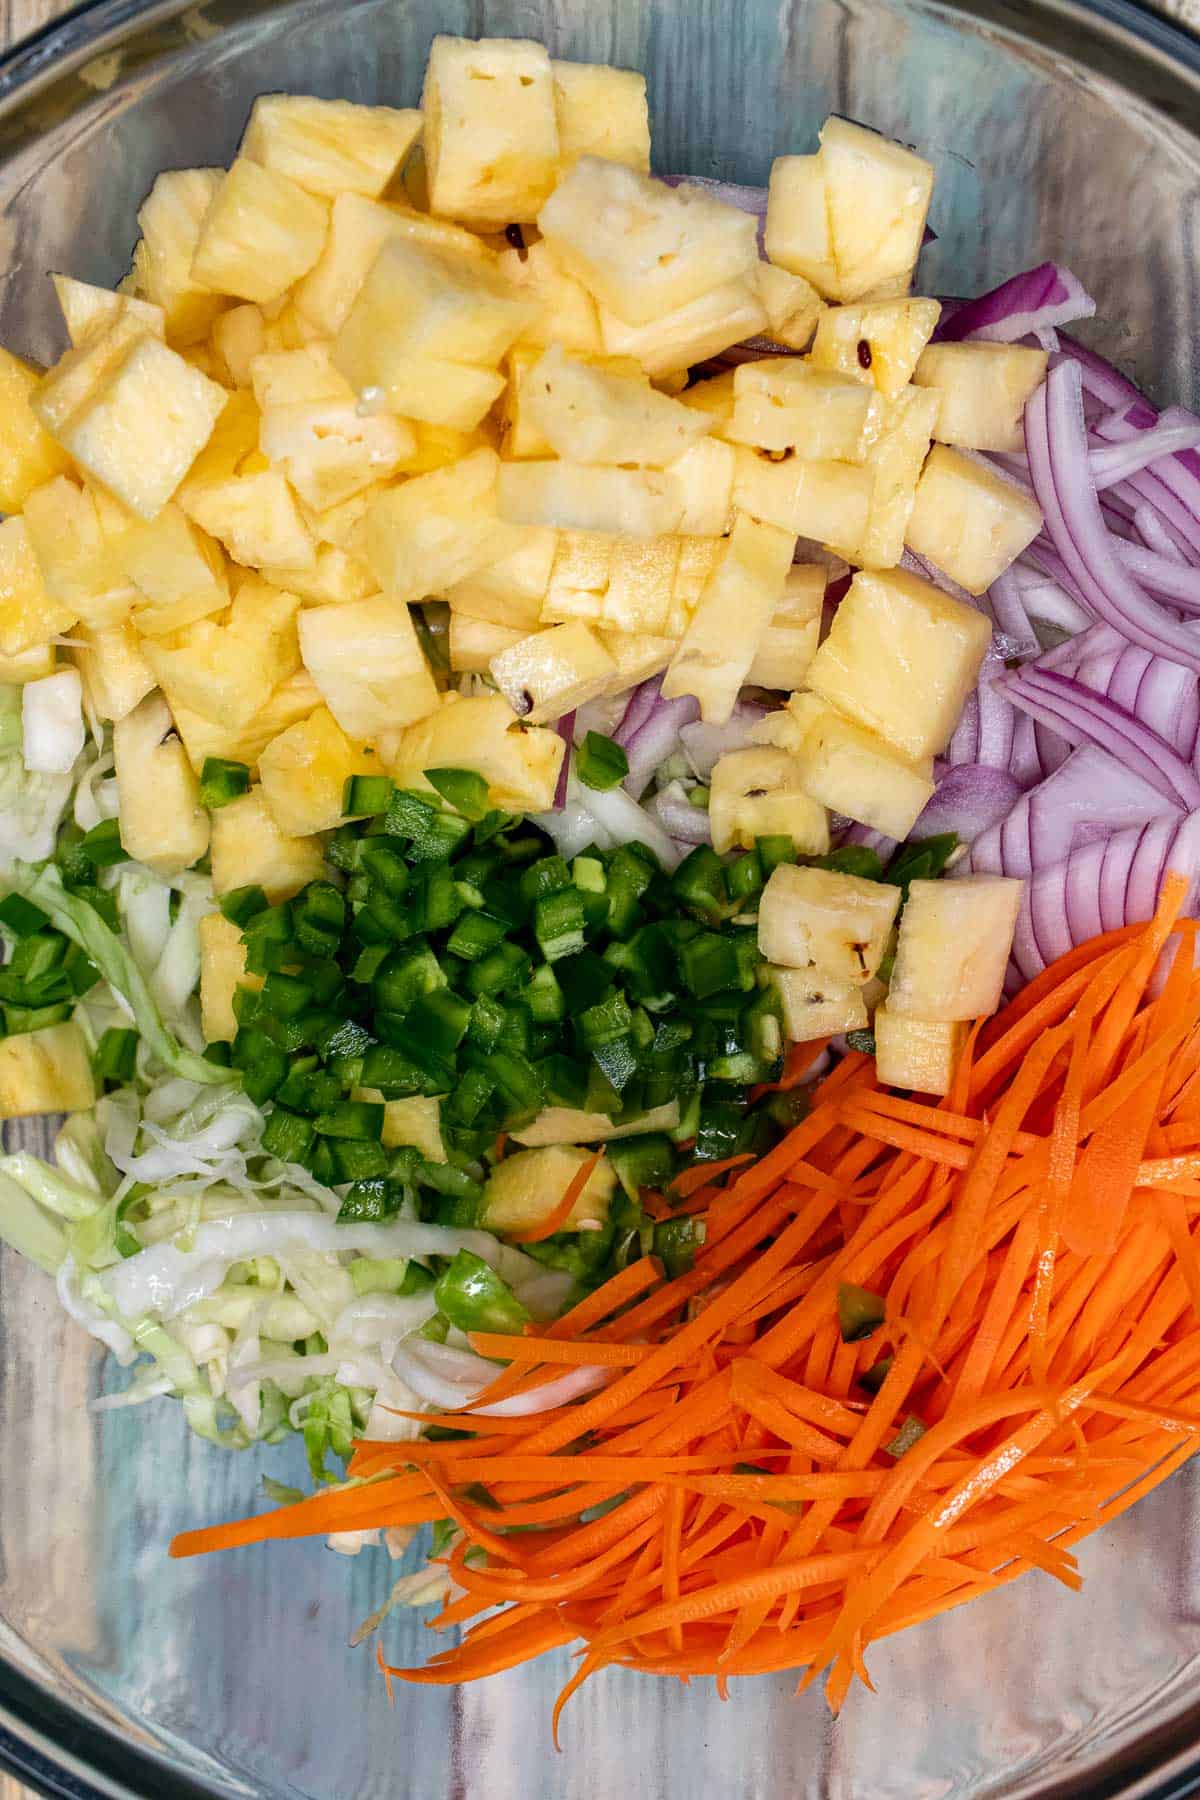 Spicy pineapple slaw ingredients in a glass bowl.